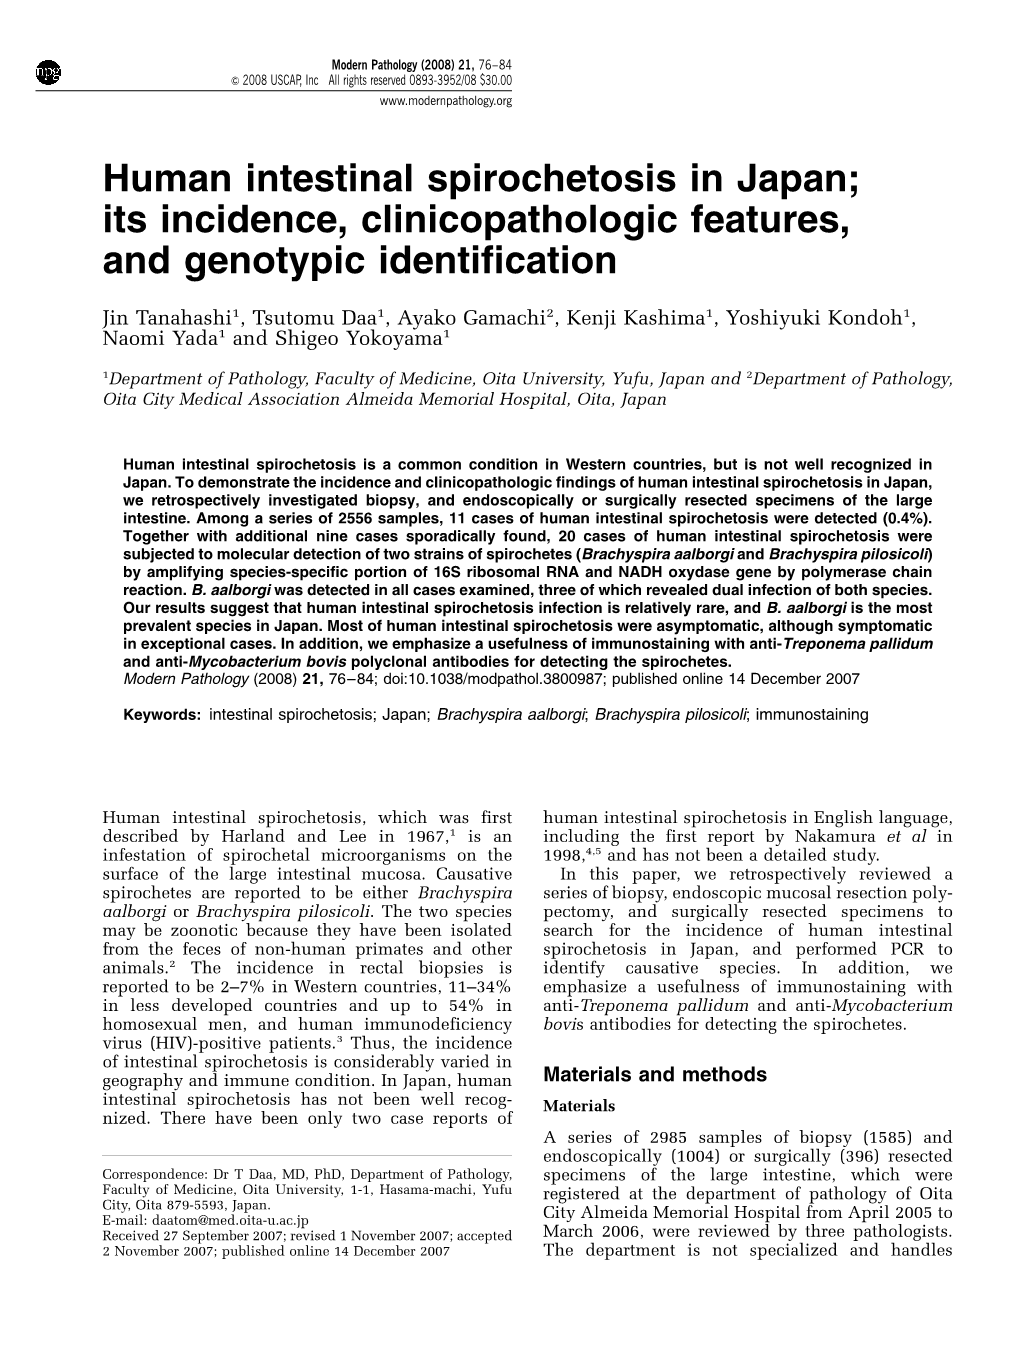 Human Intestinal Spirochetosis in Japan; Its Incidence, Clinicopathologic Features, and Genotypic Identification